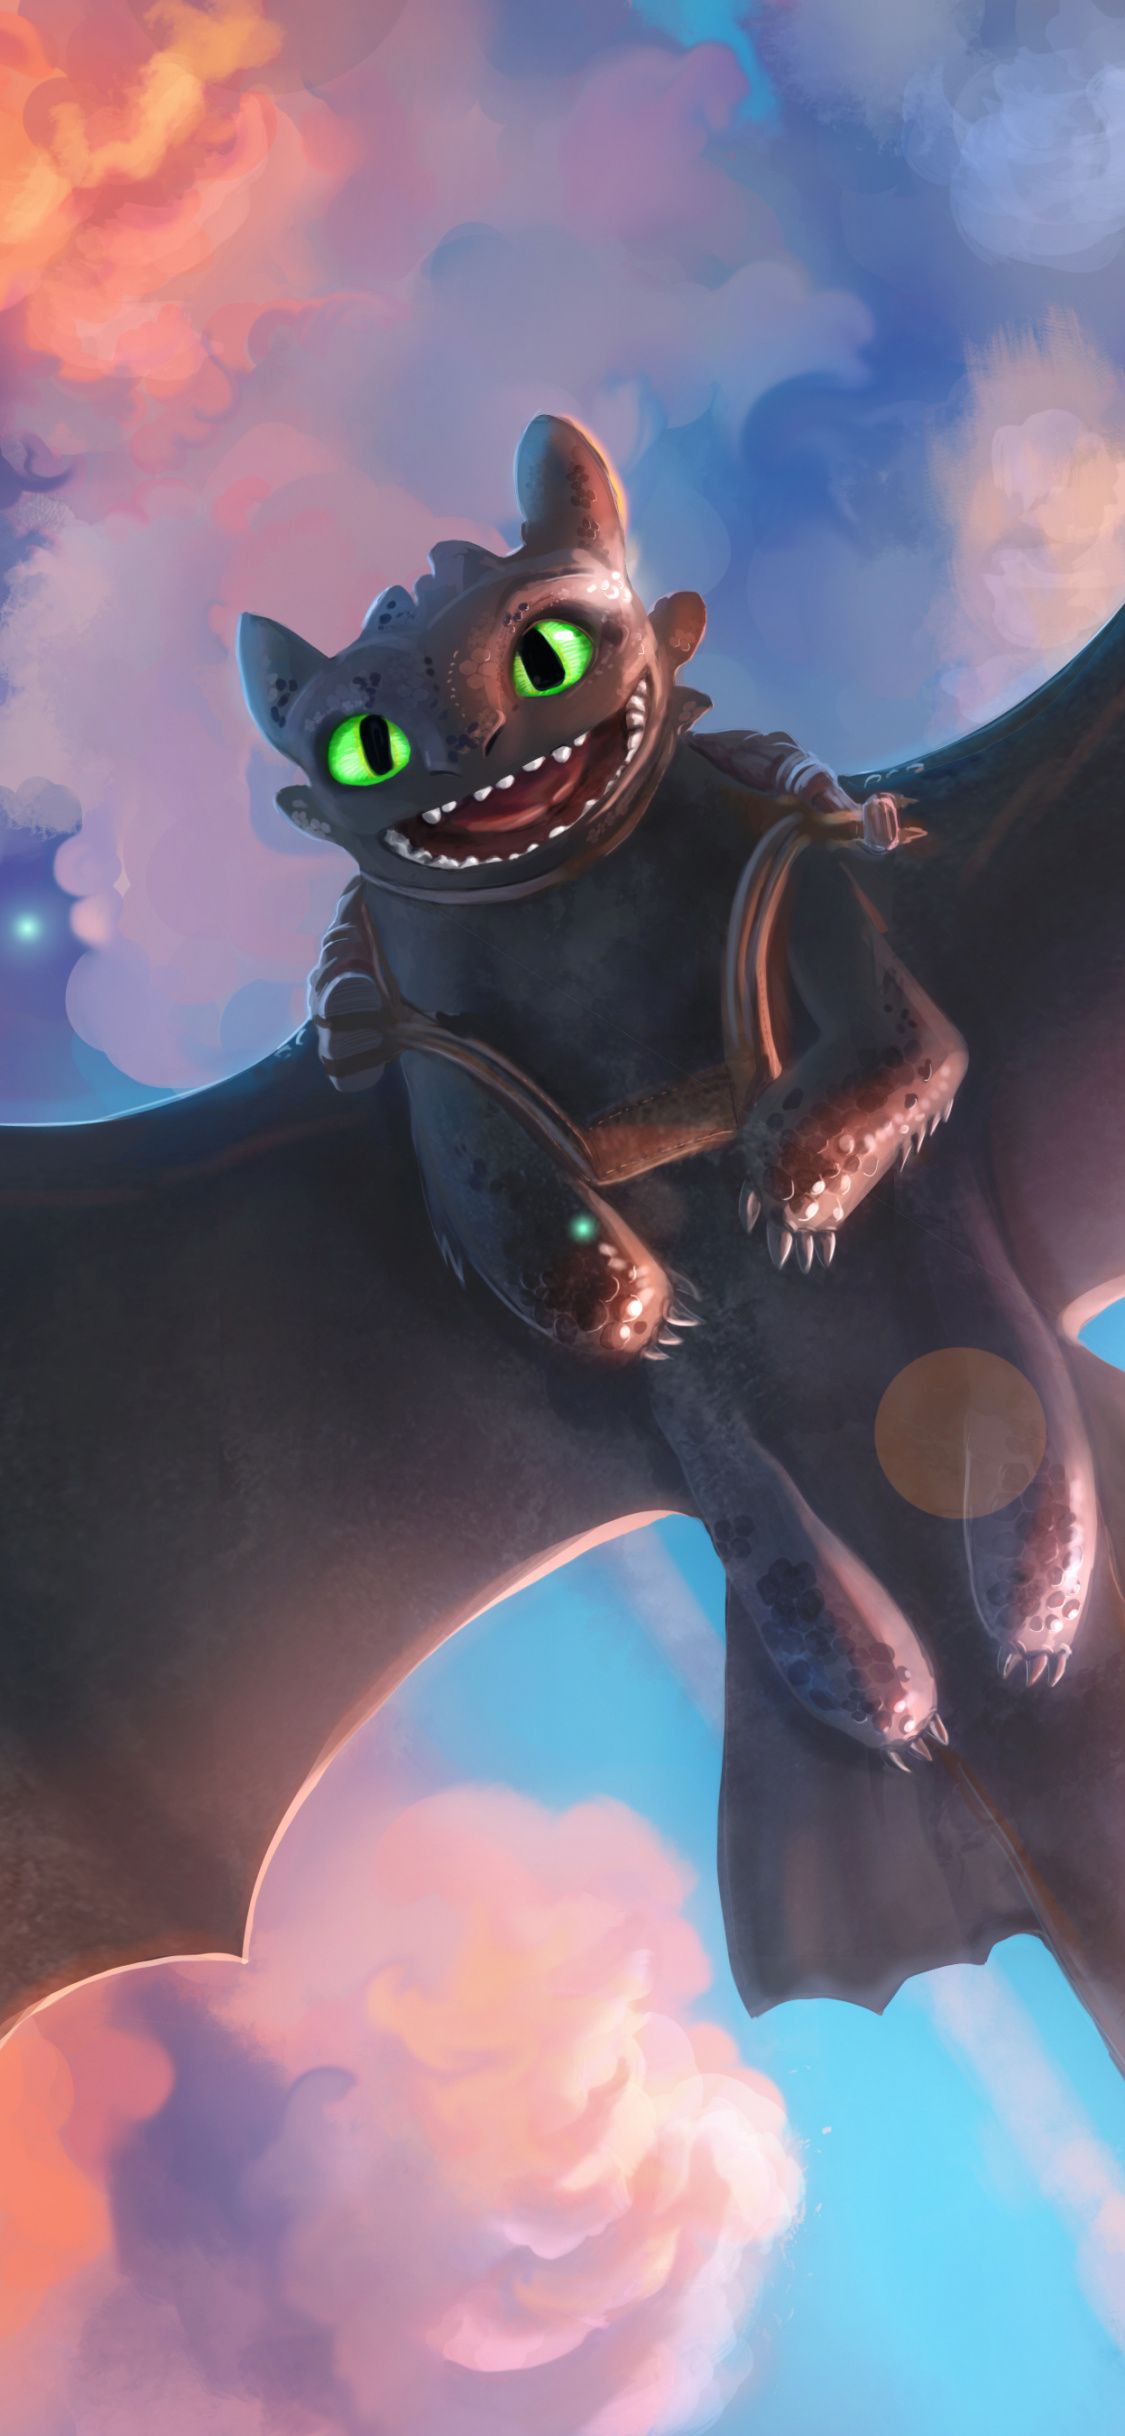 Pictures Of Toothless The Dragon Wallpapers